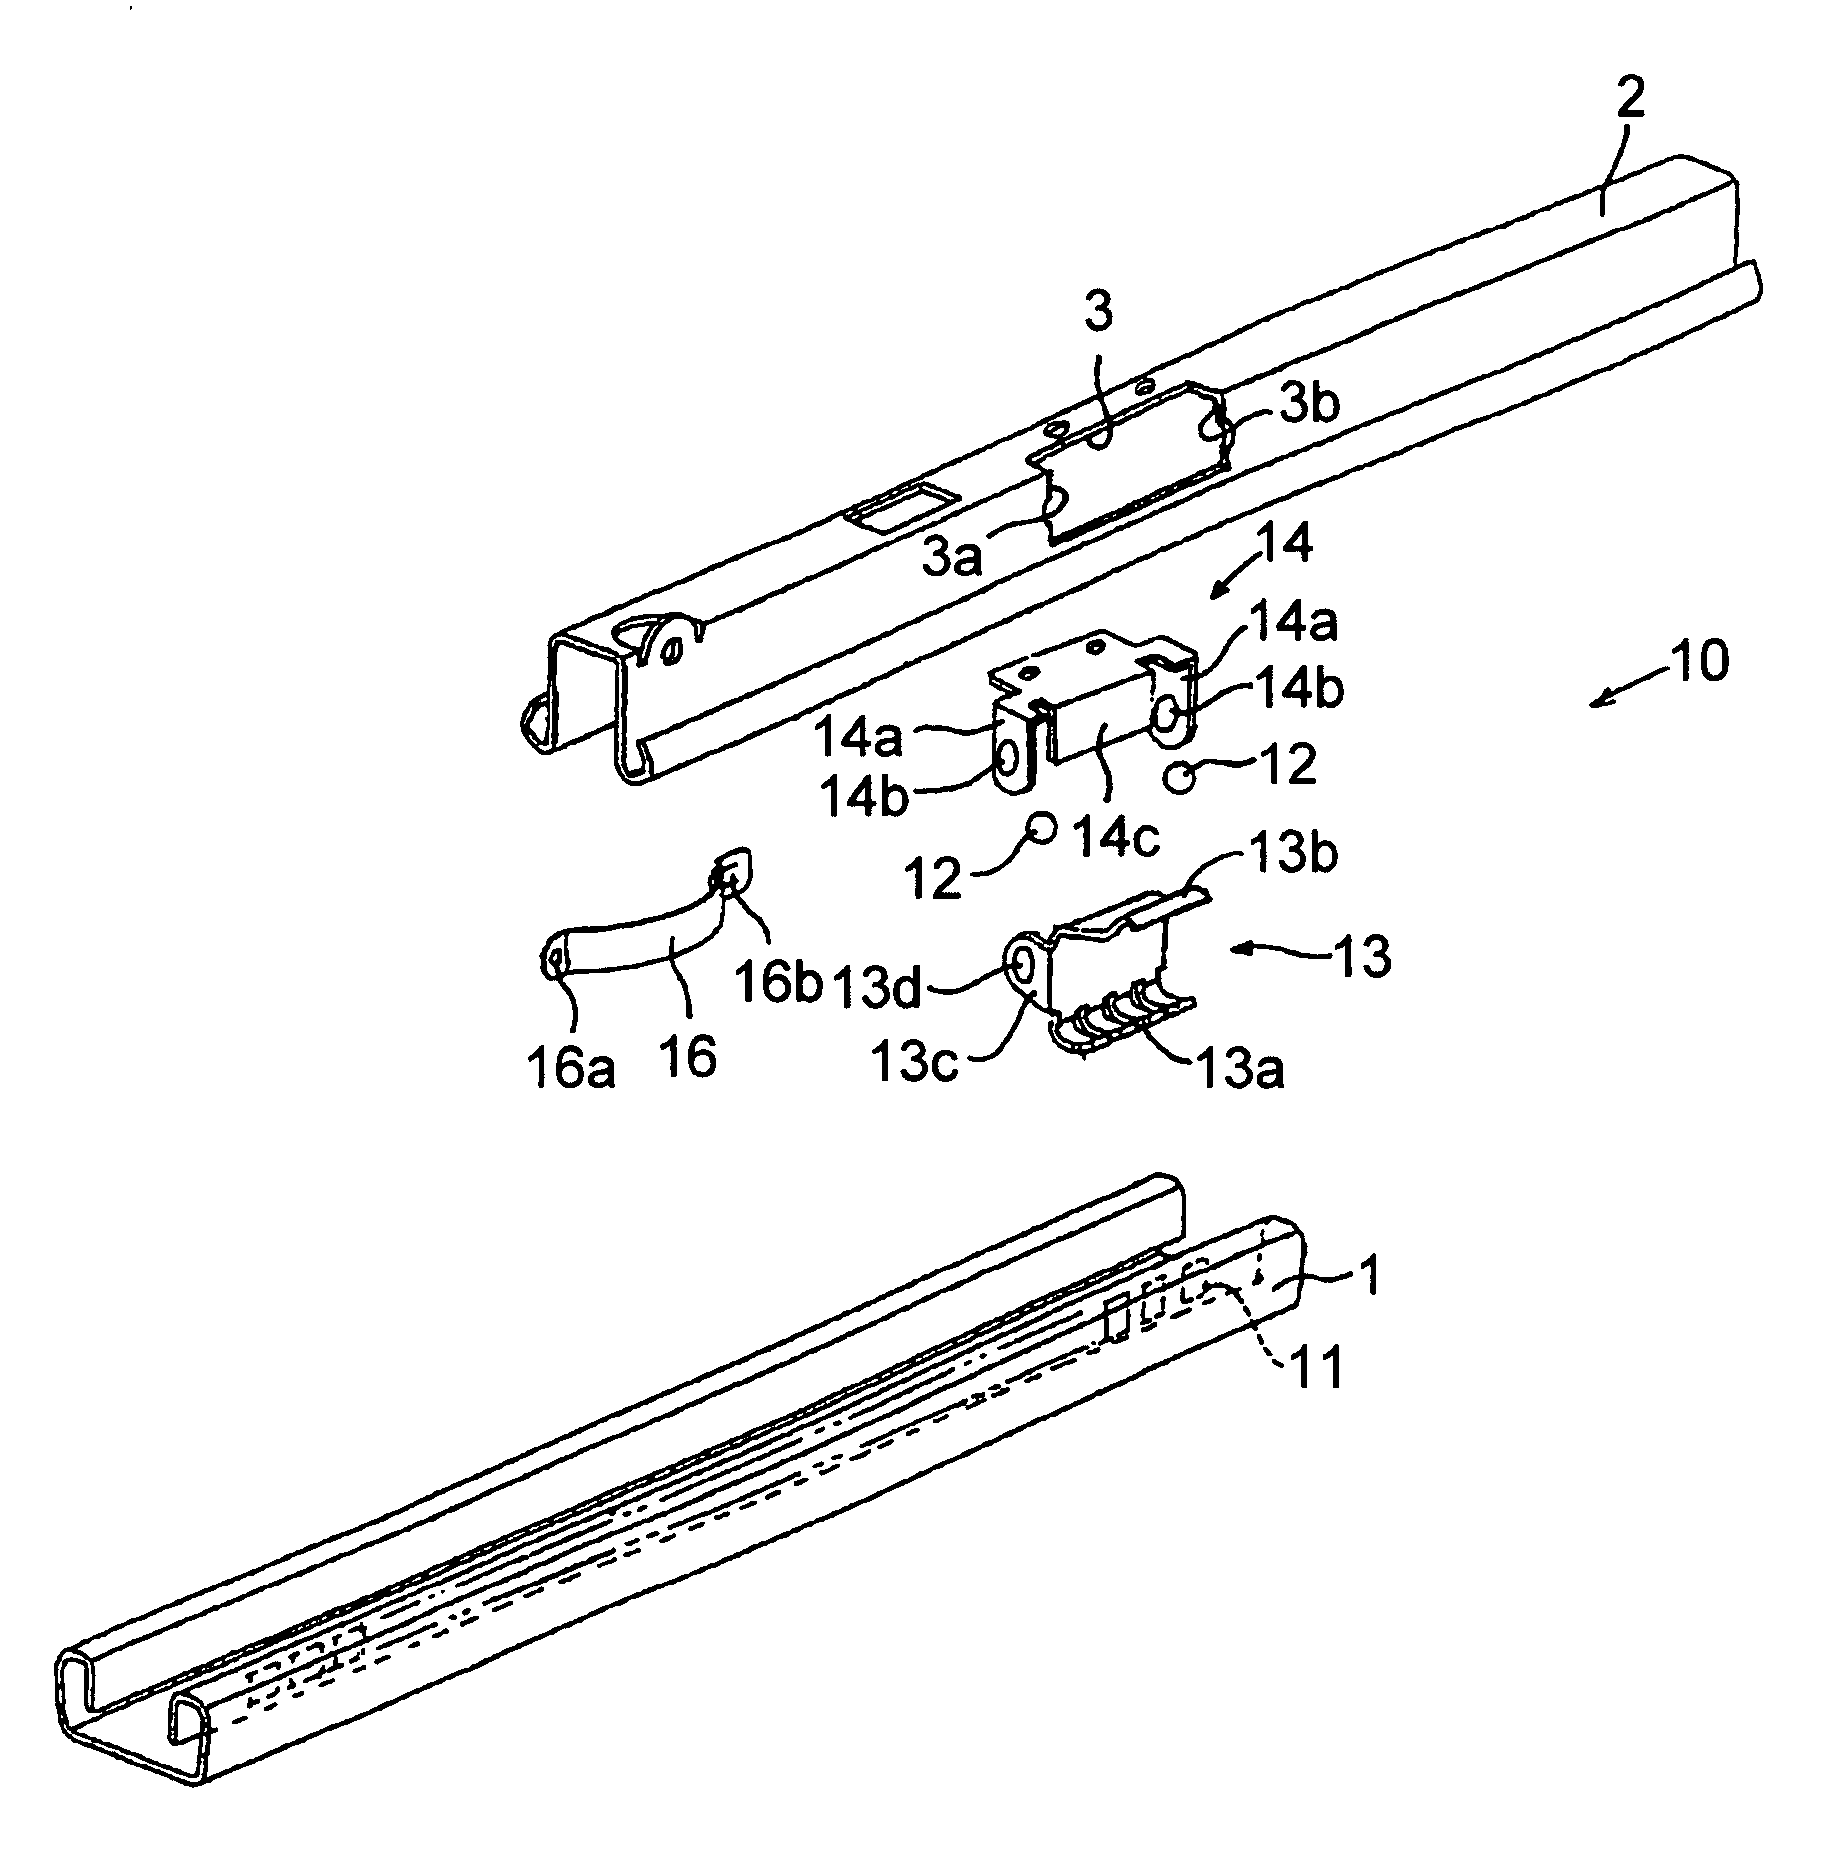 Seat sliding apparatus for vehicle